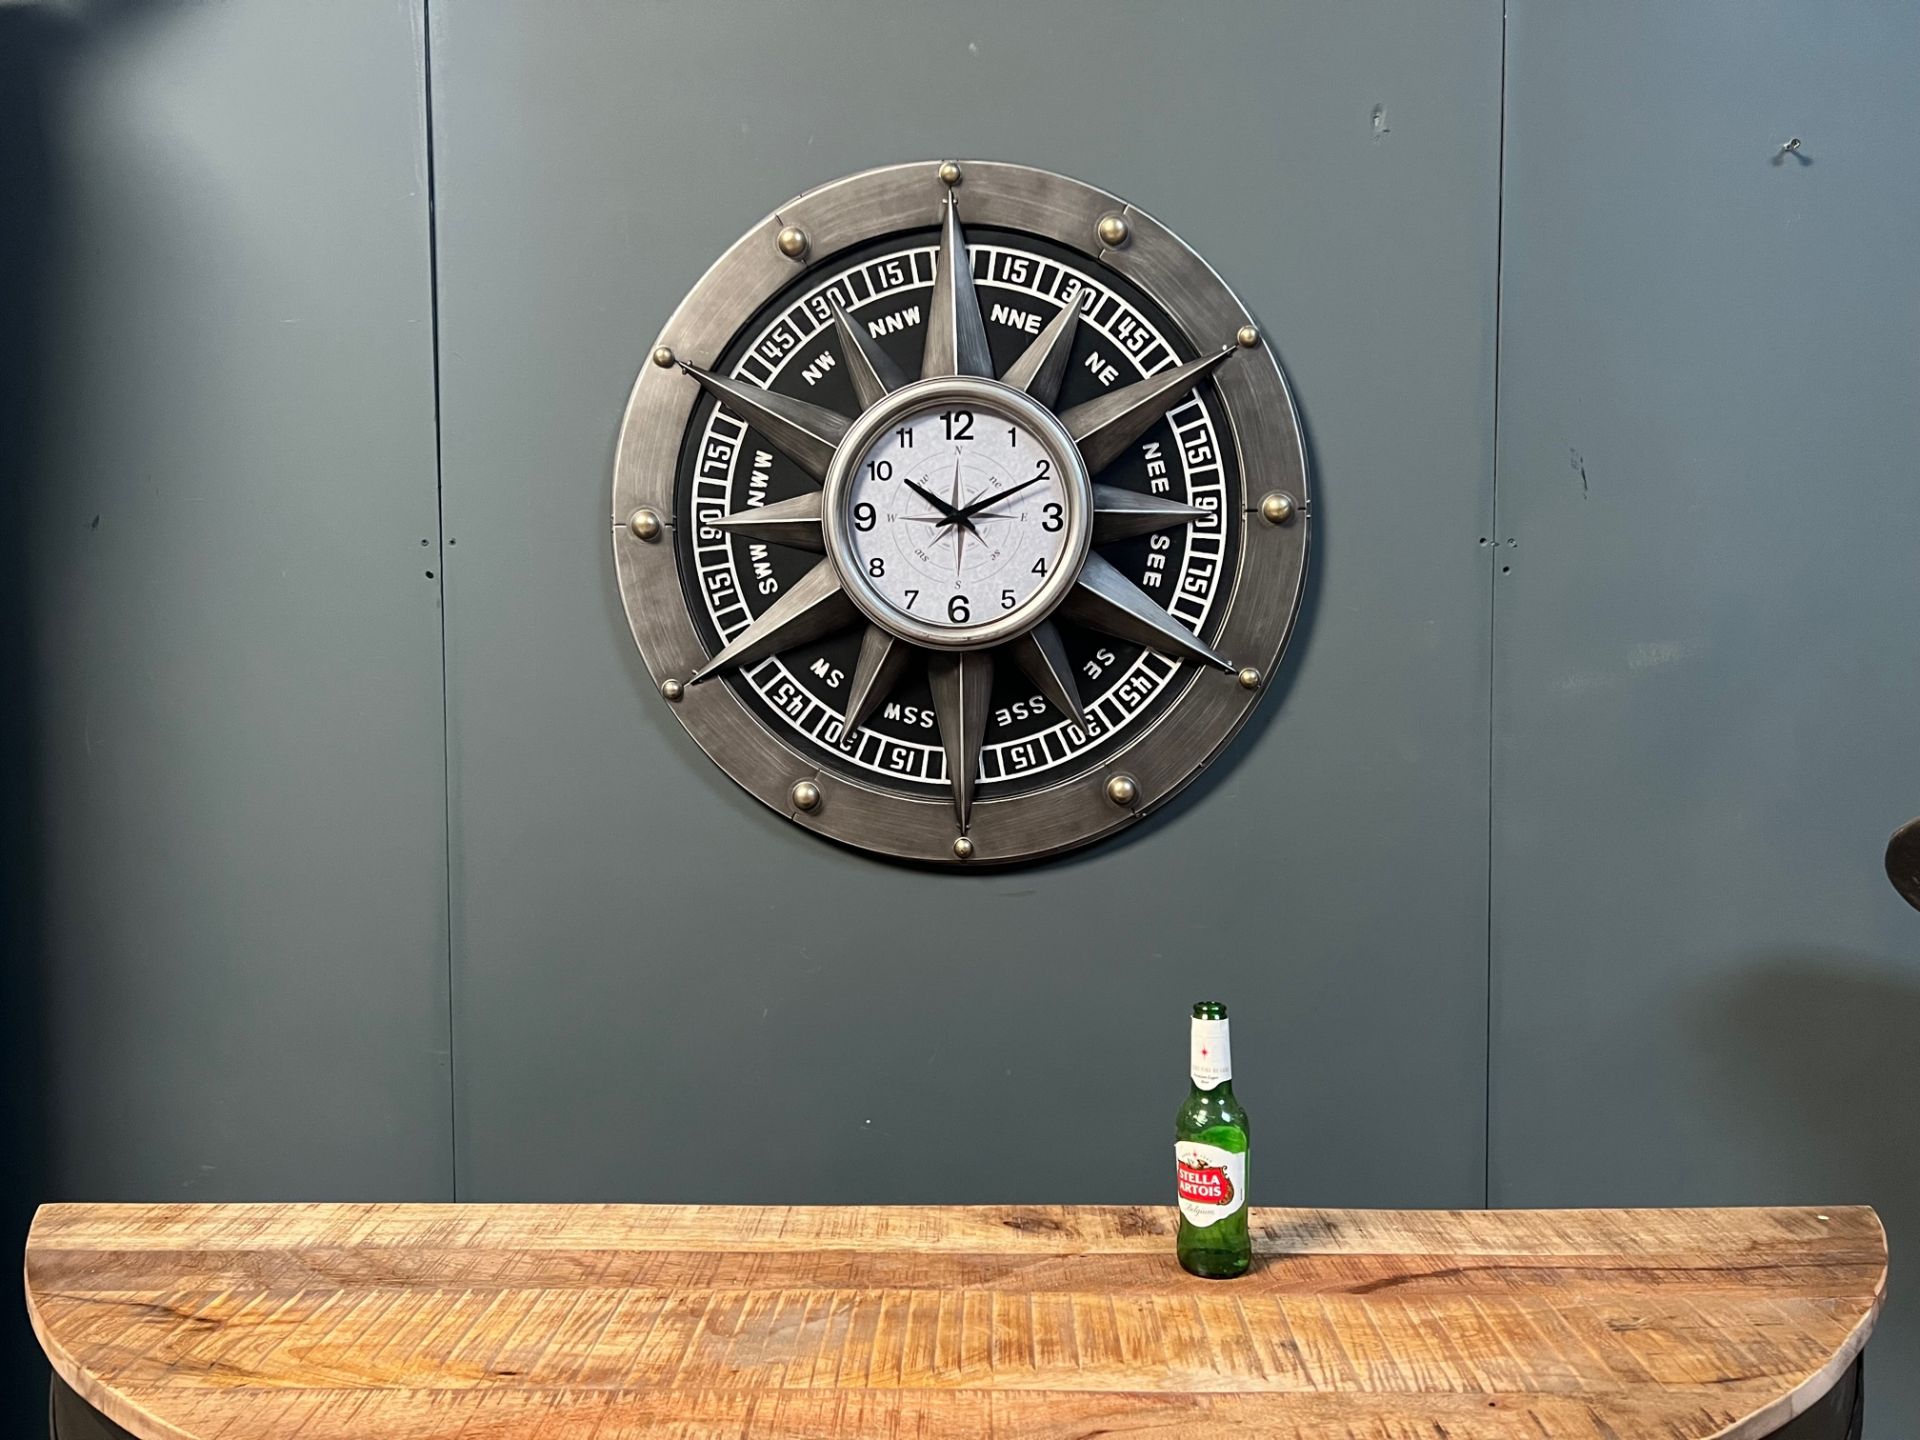 NEW BOXED VINTAGE INDUSTRIAL STYLE COMPASS CLOCK - Image 3 of 4